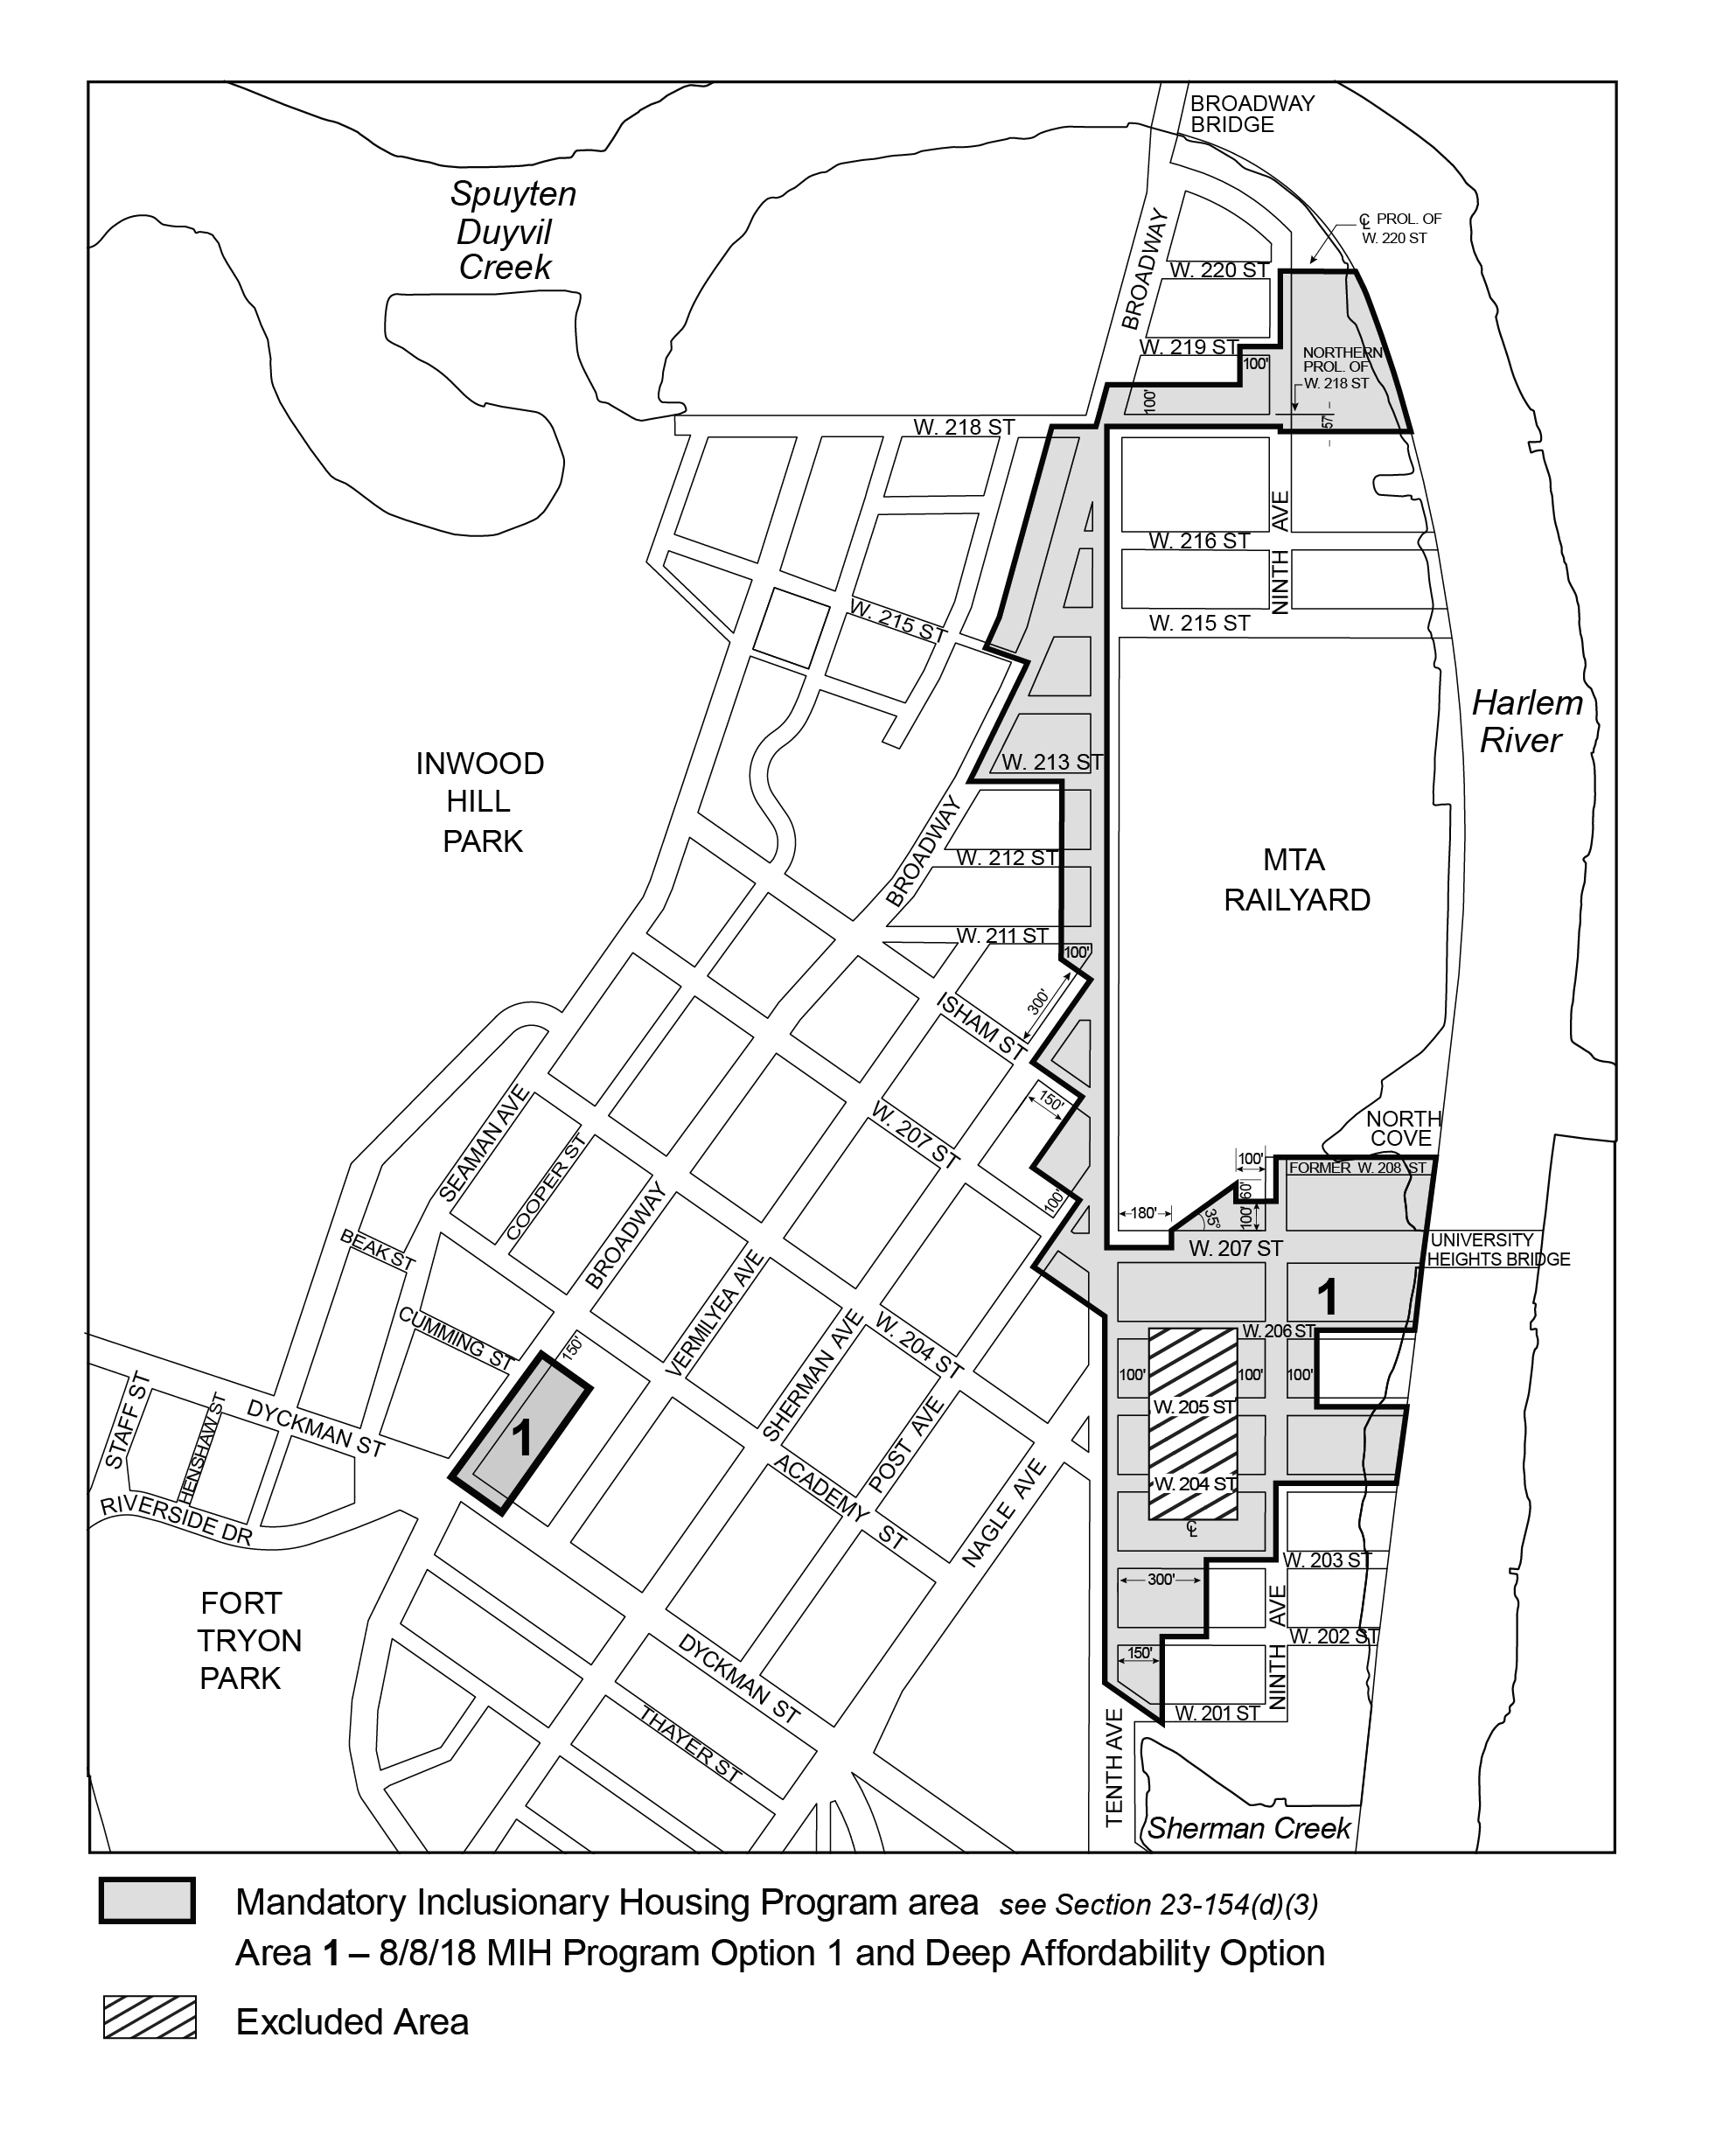 APPENDIX F, Manhattan CD 12, Map 1, MIH area 1 (Option 1, Deep Affordability Option) per Special Inwood District Rezoning (N 180205(A) ZRM) adopted 8 August l 2018